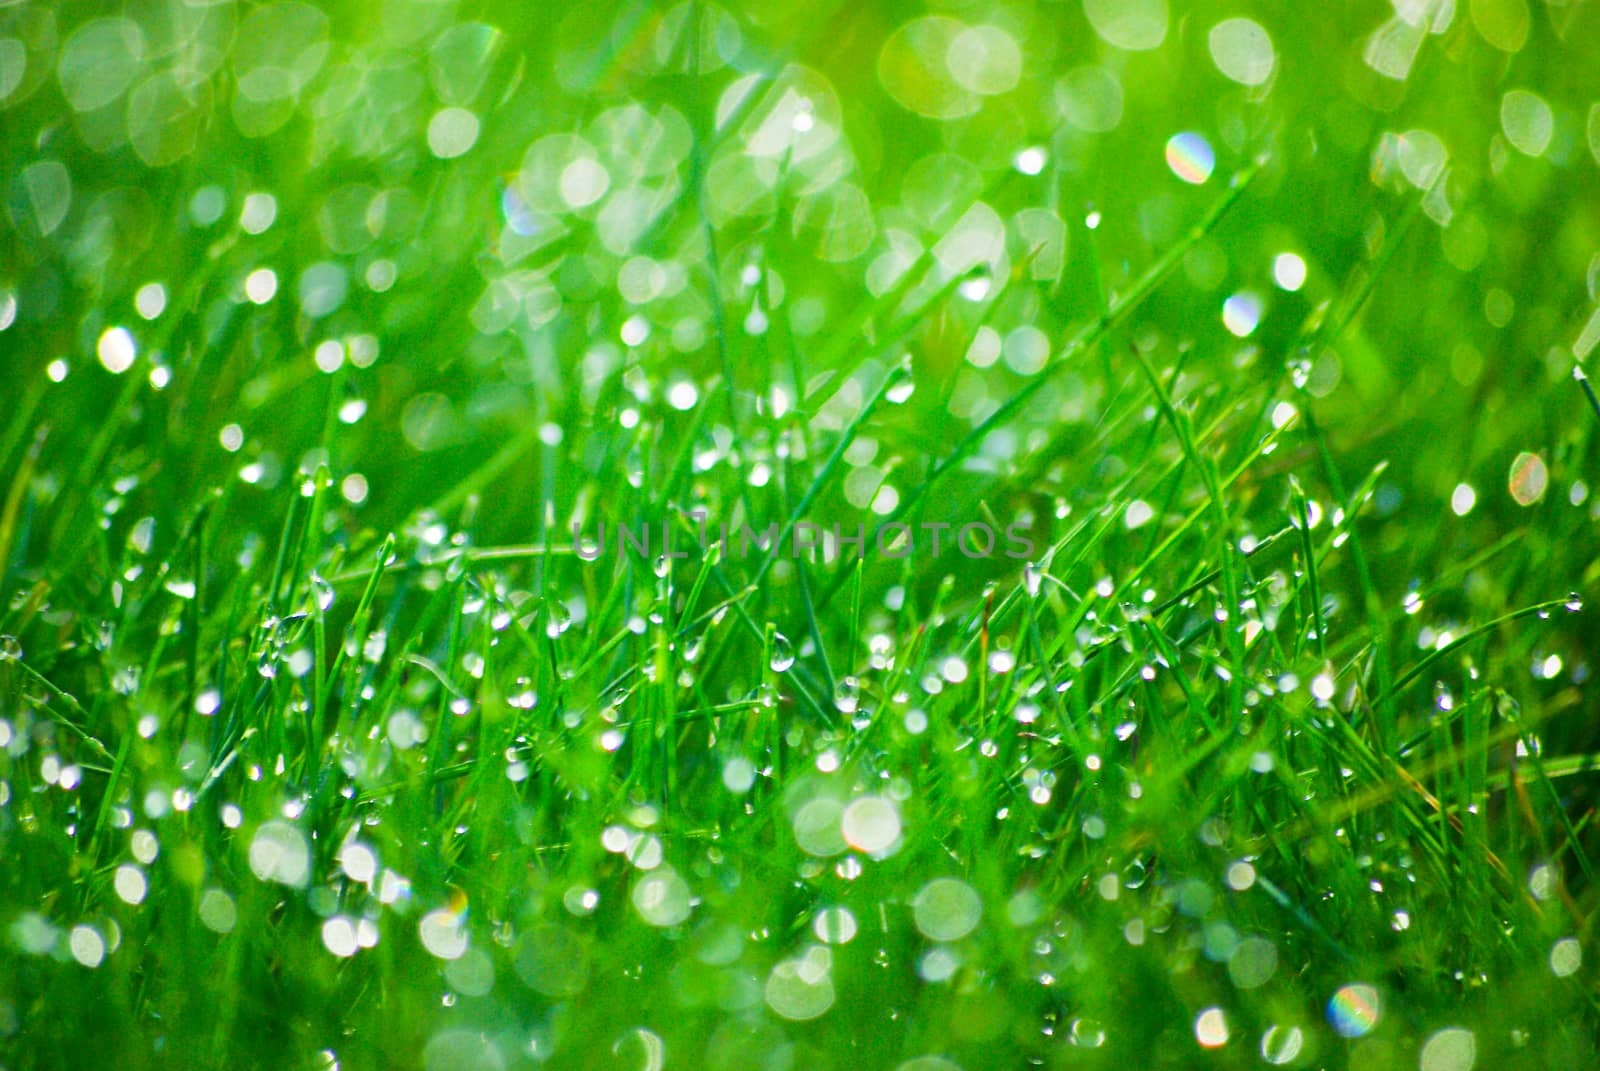 Grass in a meadow with dew drops early in the morning at sunrise.Texture or background